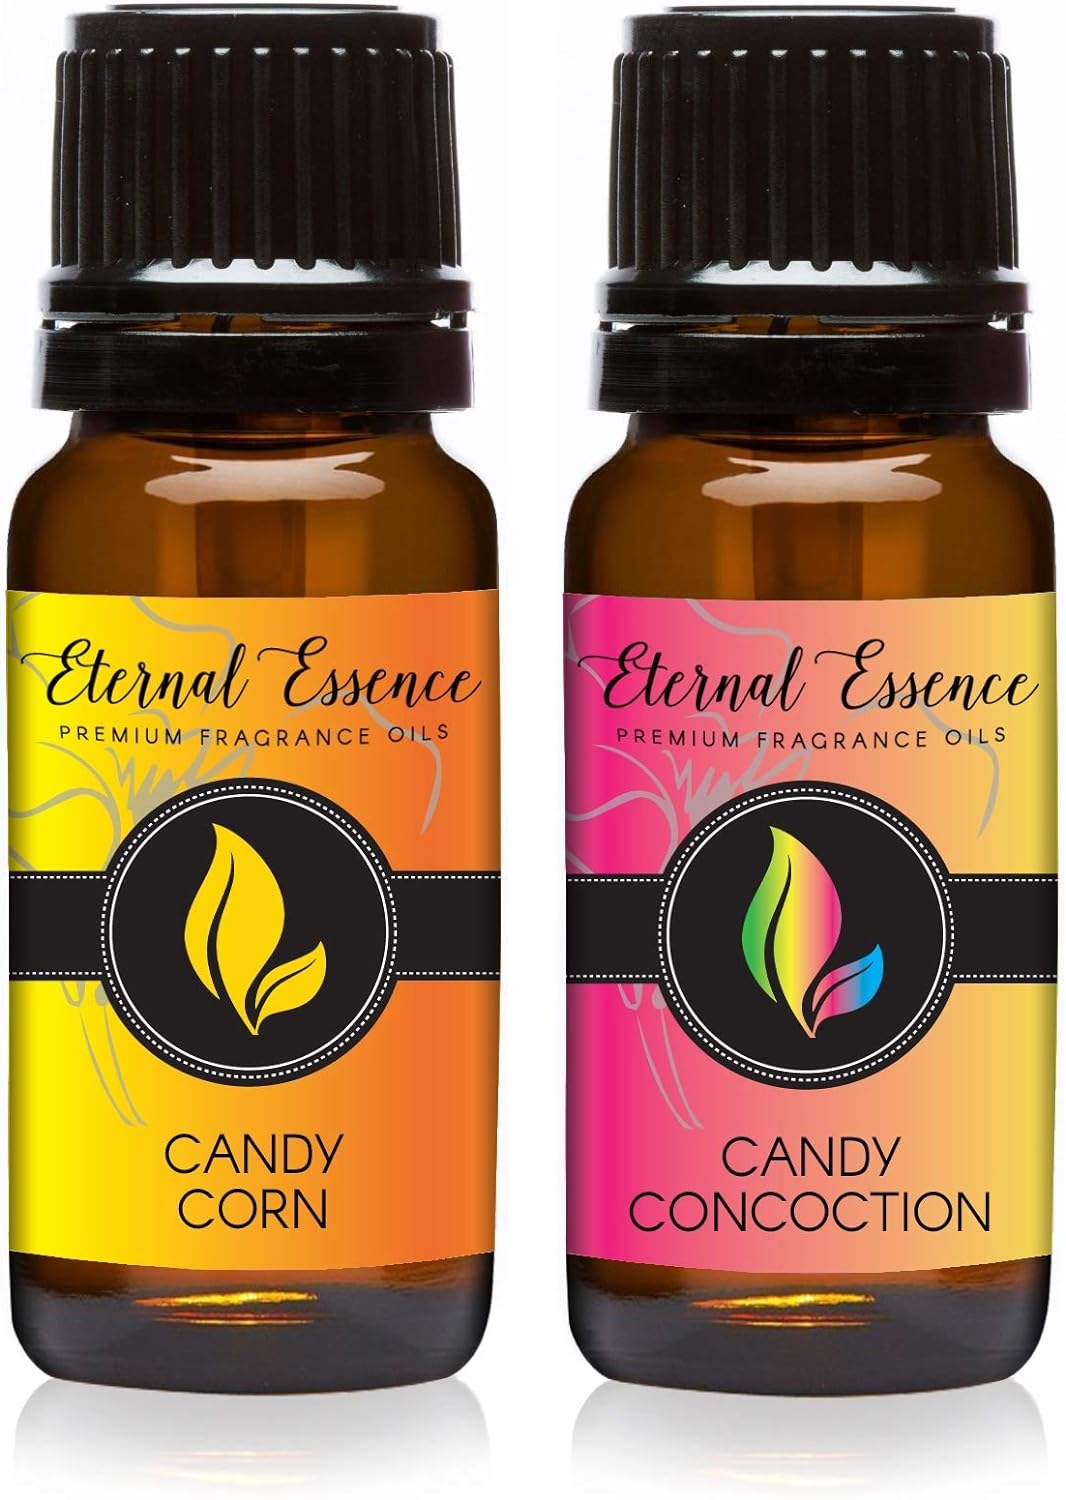 Candy Concoction & Candy Corn